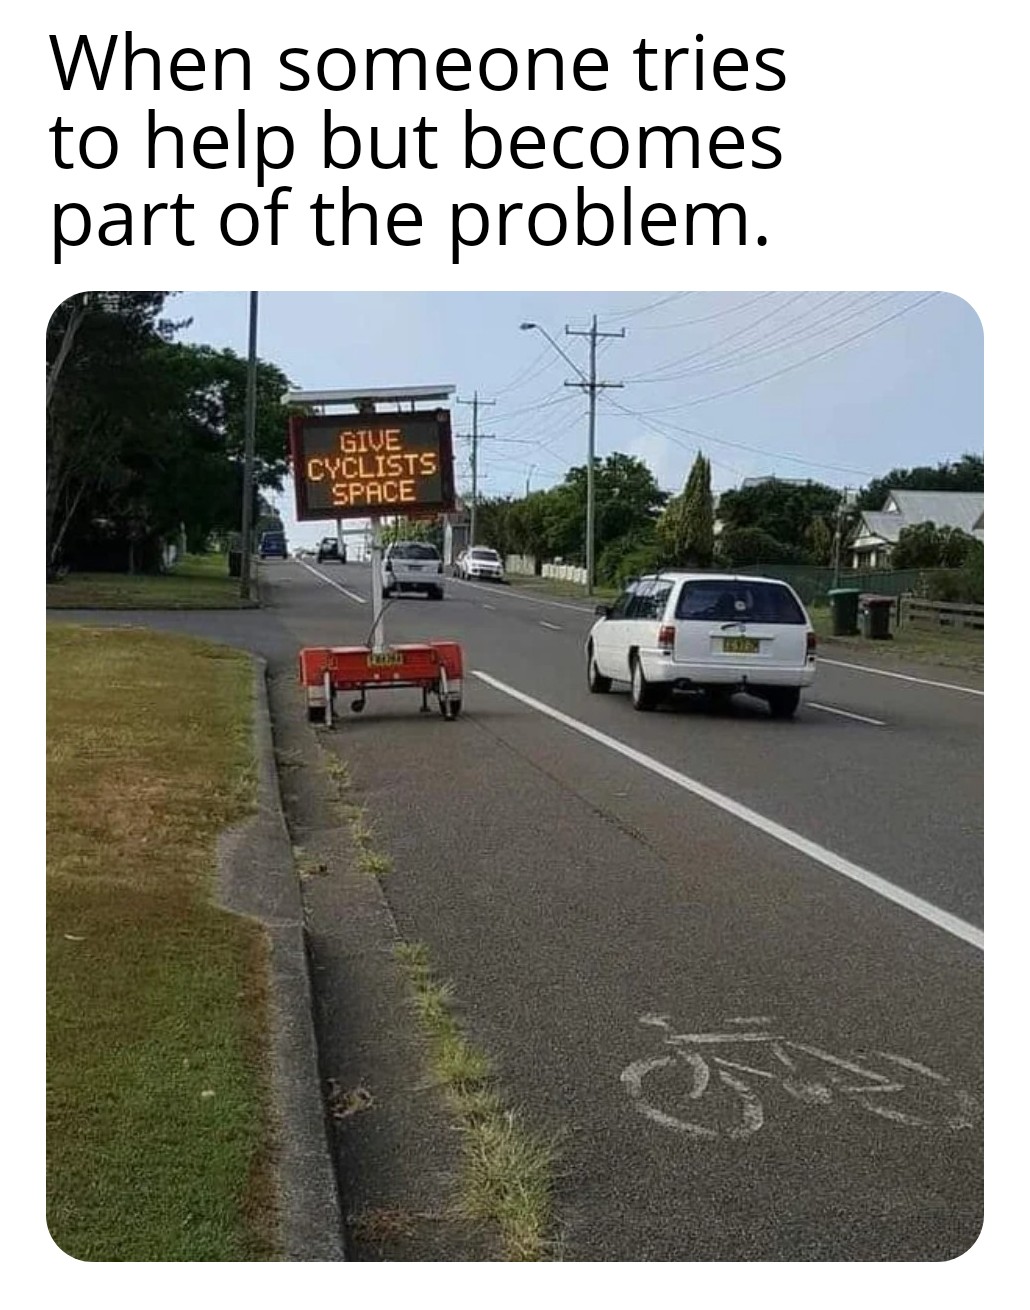 Funny and memes - lane - When someone tries to help but becomes part of the problem. Give Cyclists Space